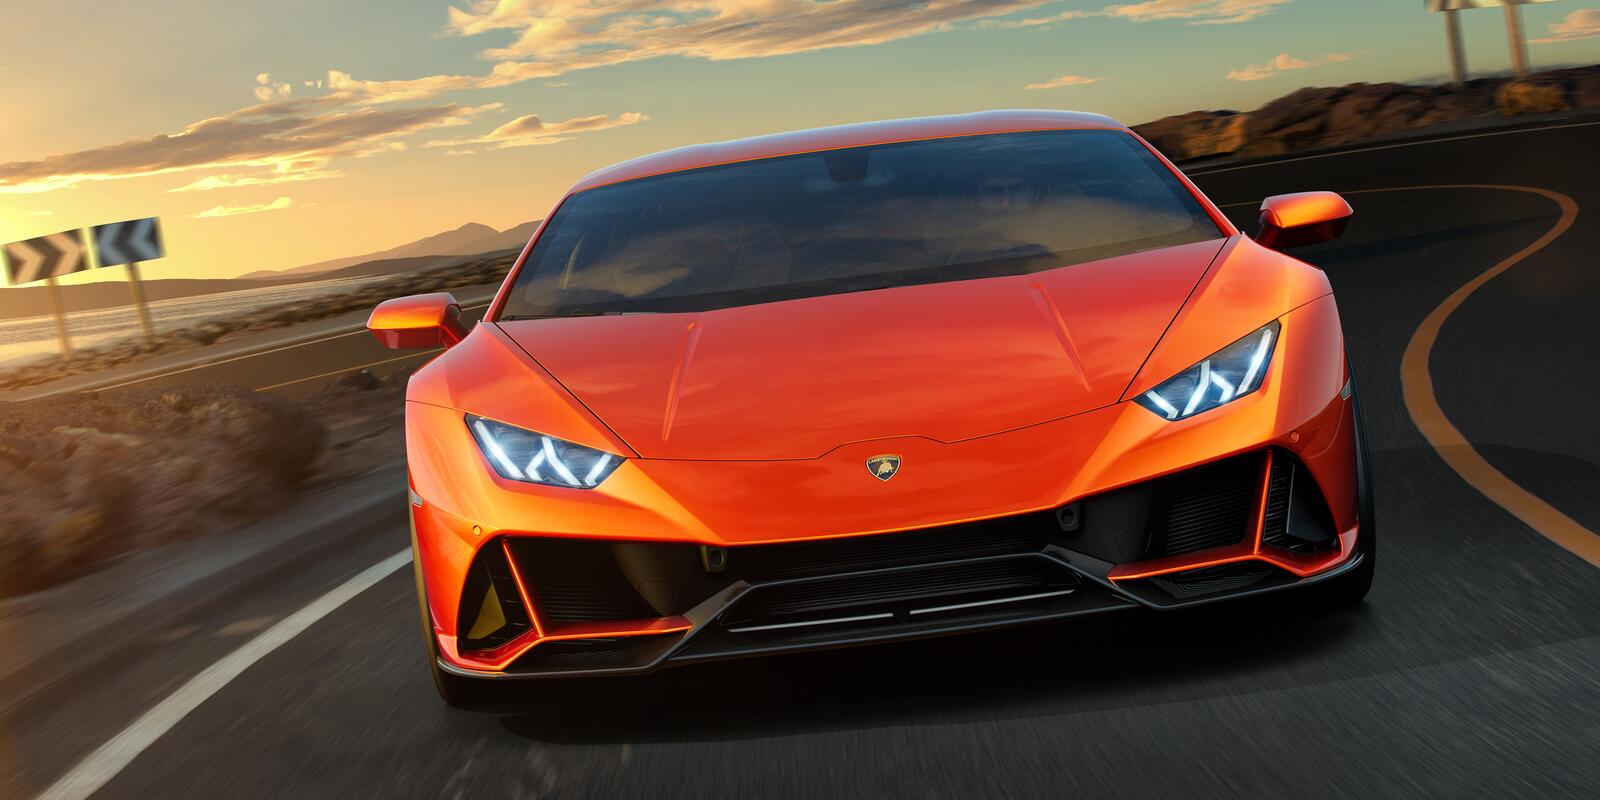 Wallpapers orange supercars road front view on the desktop